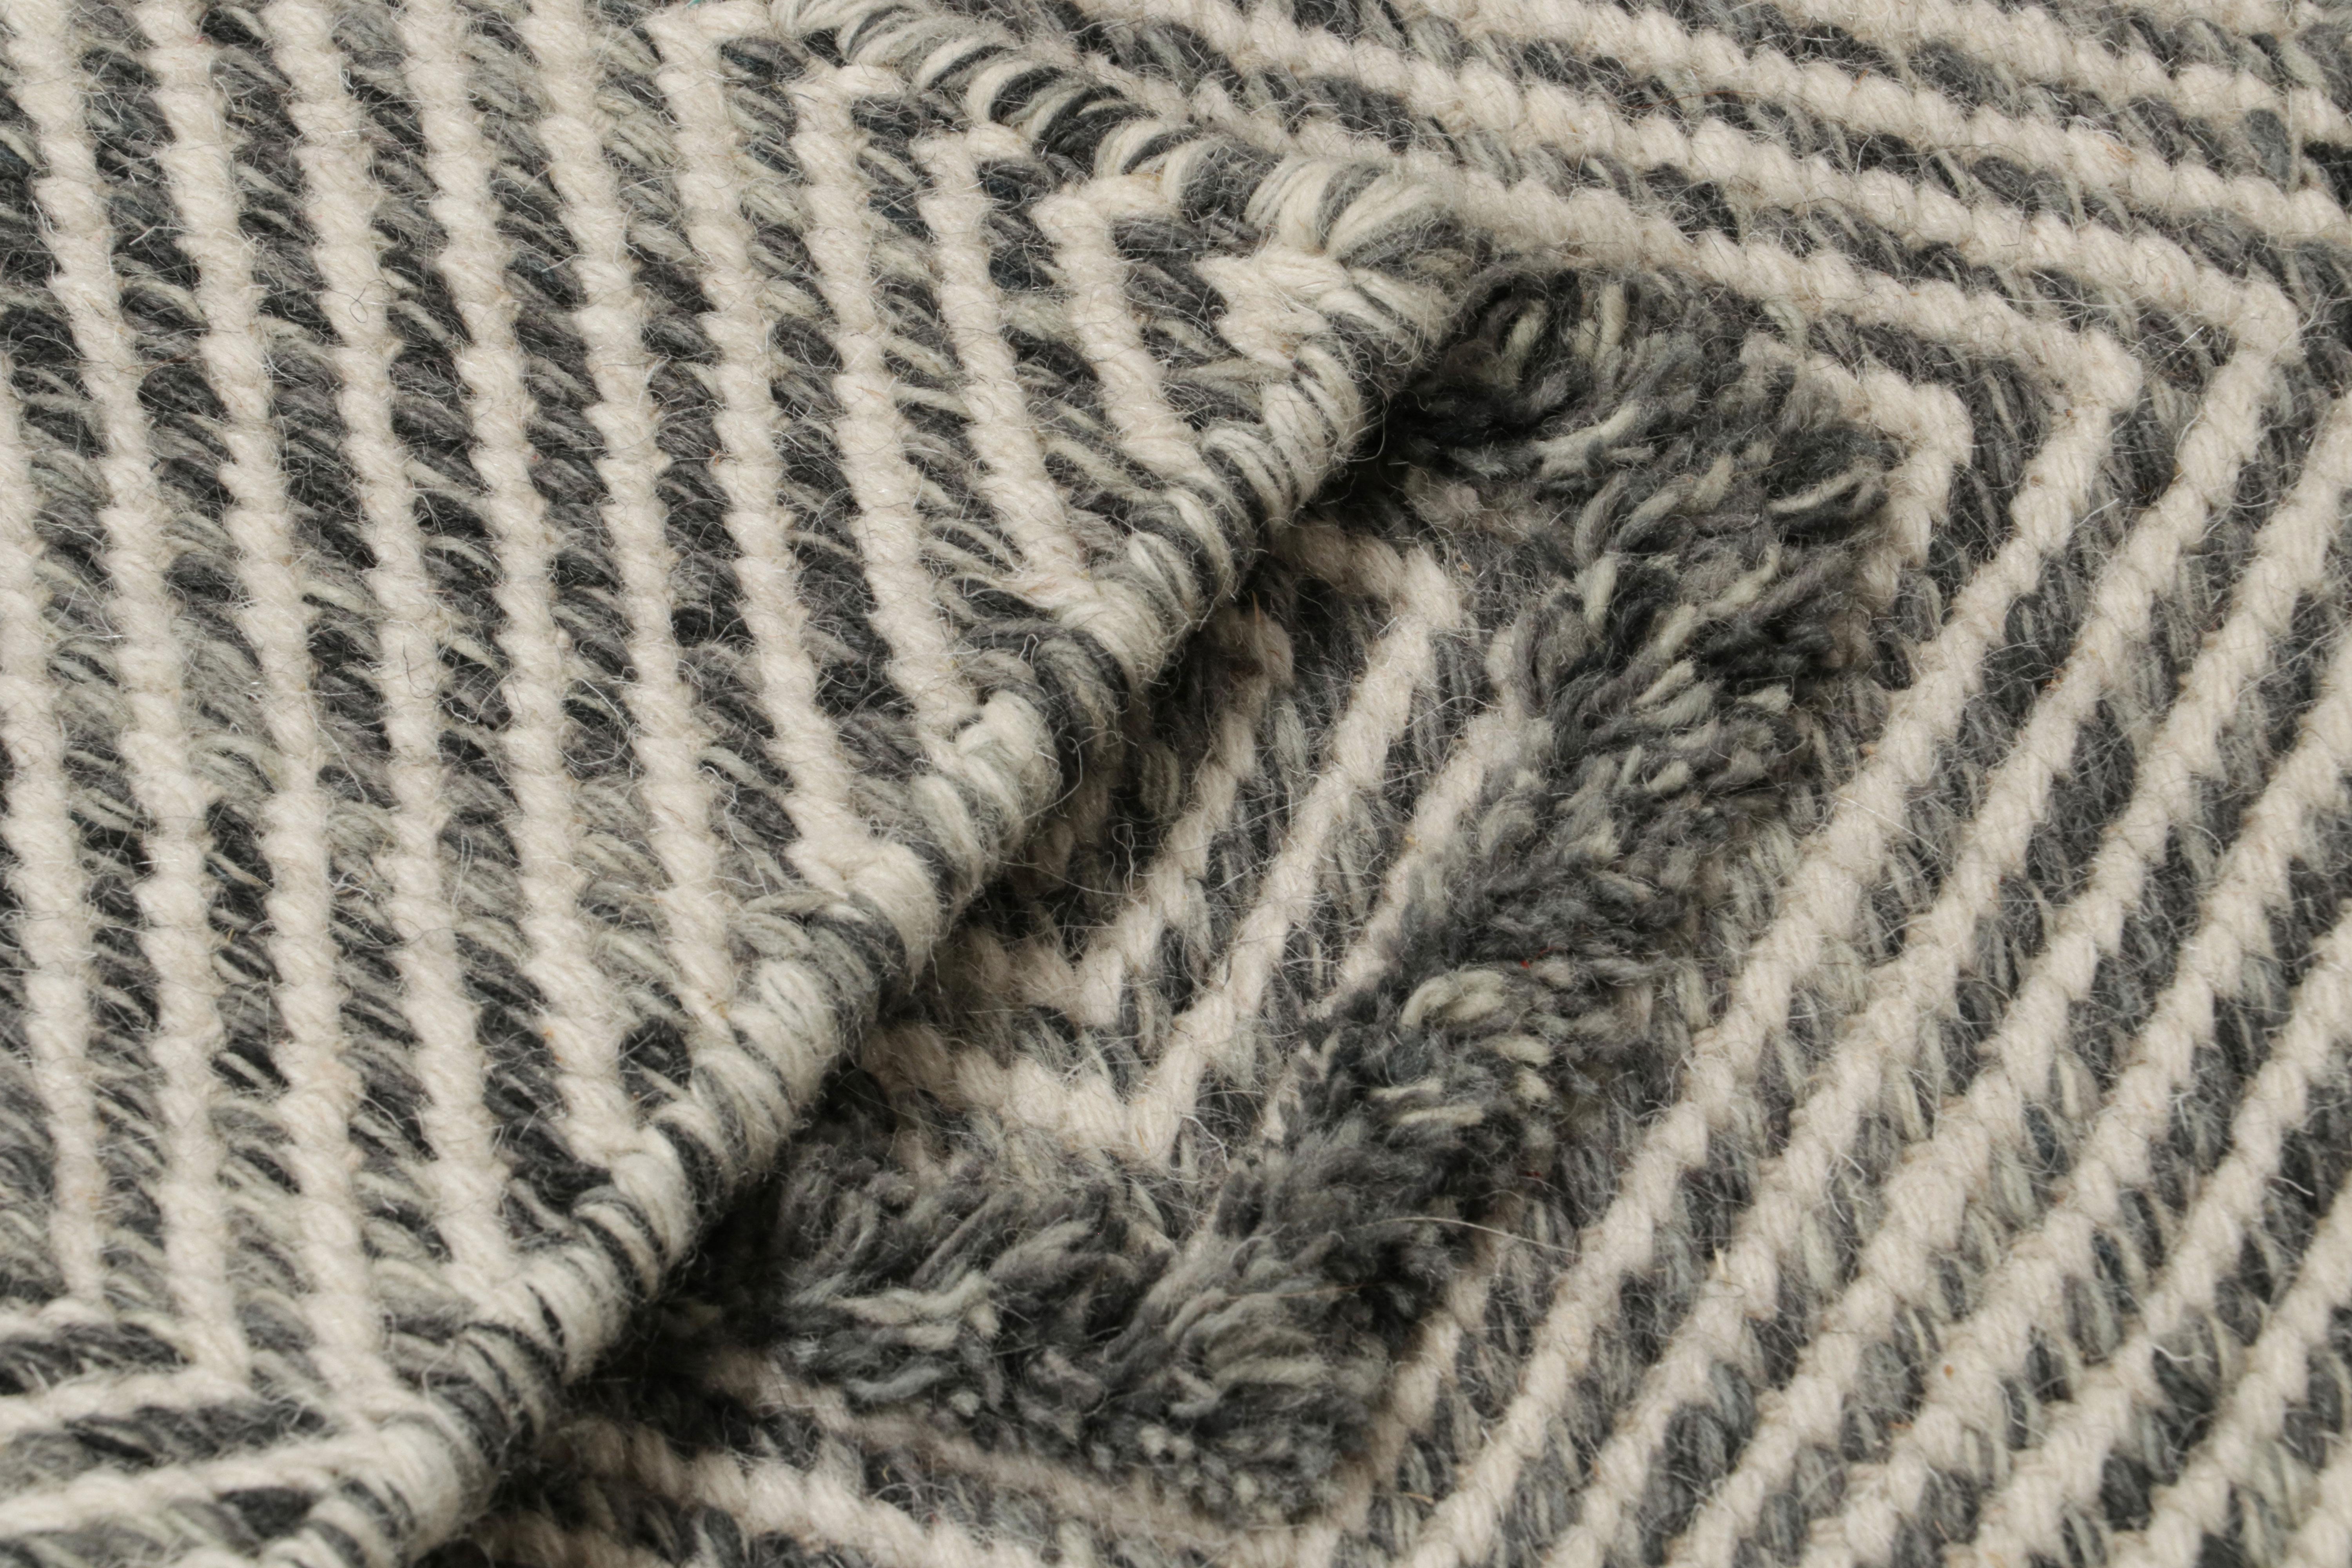 Handwoven in wool, a 2x2 scatter rug from Rug & Kilim’s modern selections.

On the Design:

The piece plays flatweave and pile together as seen in the larger diamond patterns which sport a shaggy, high-pile texture that stands out from the flatweave